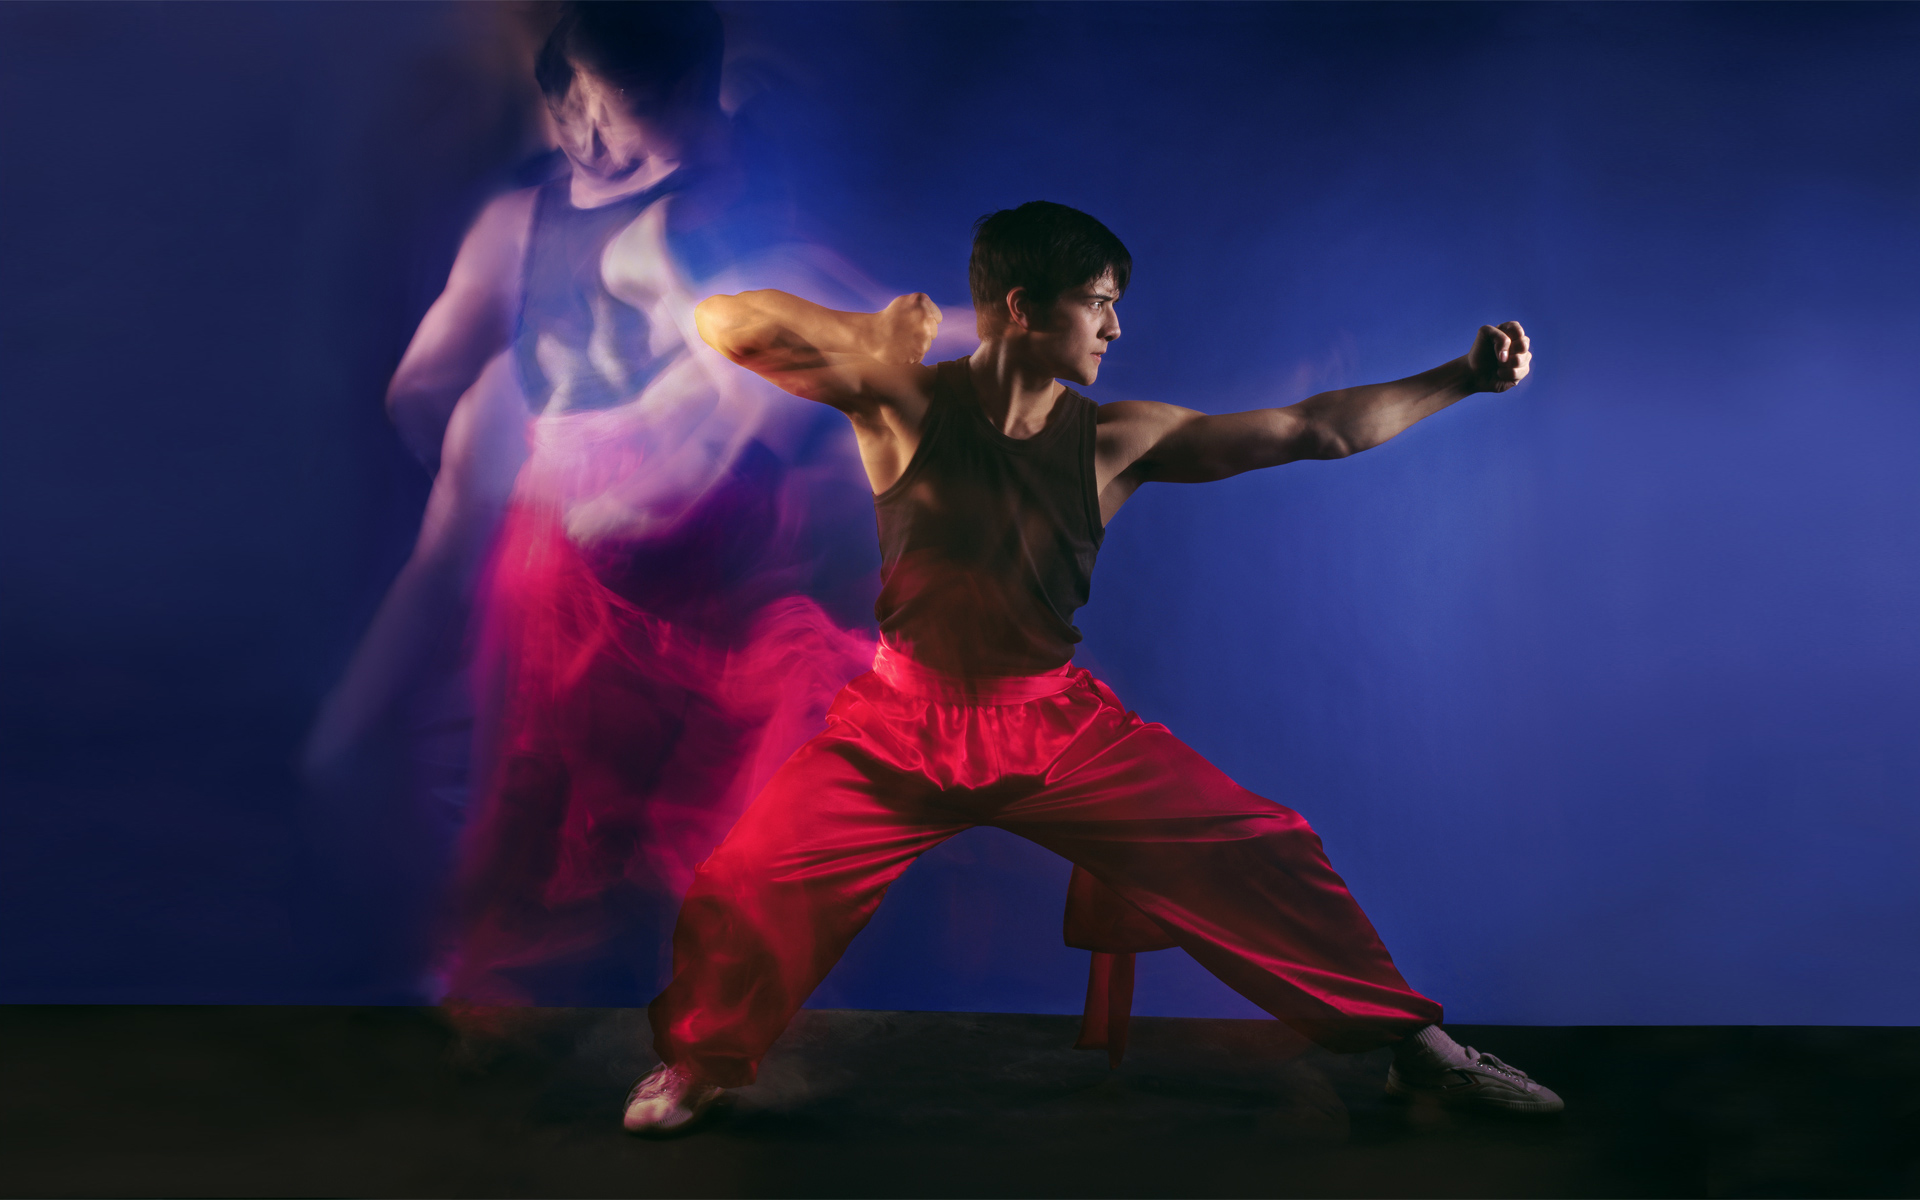 Martial artist performer in a photography studio with motion blur beside him